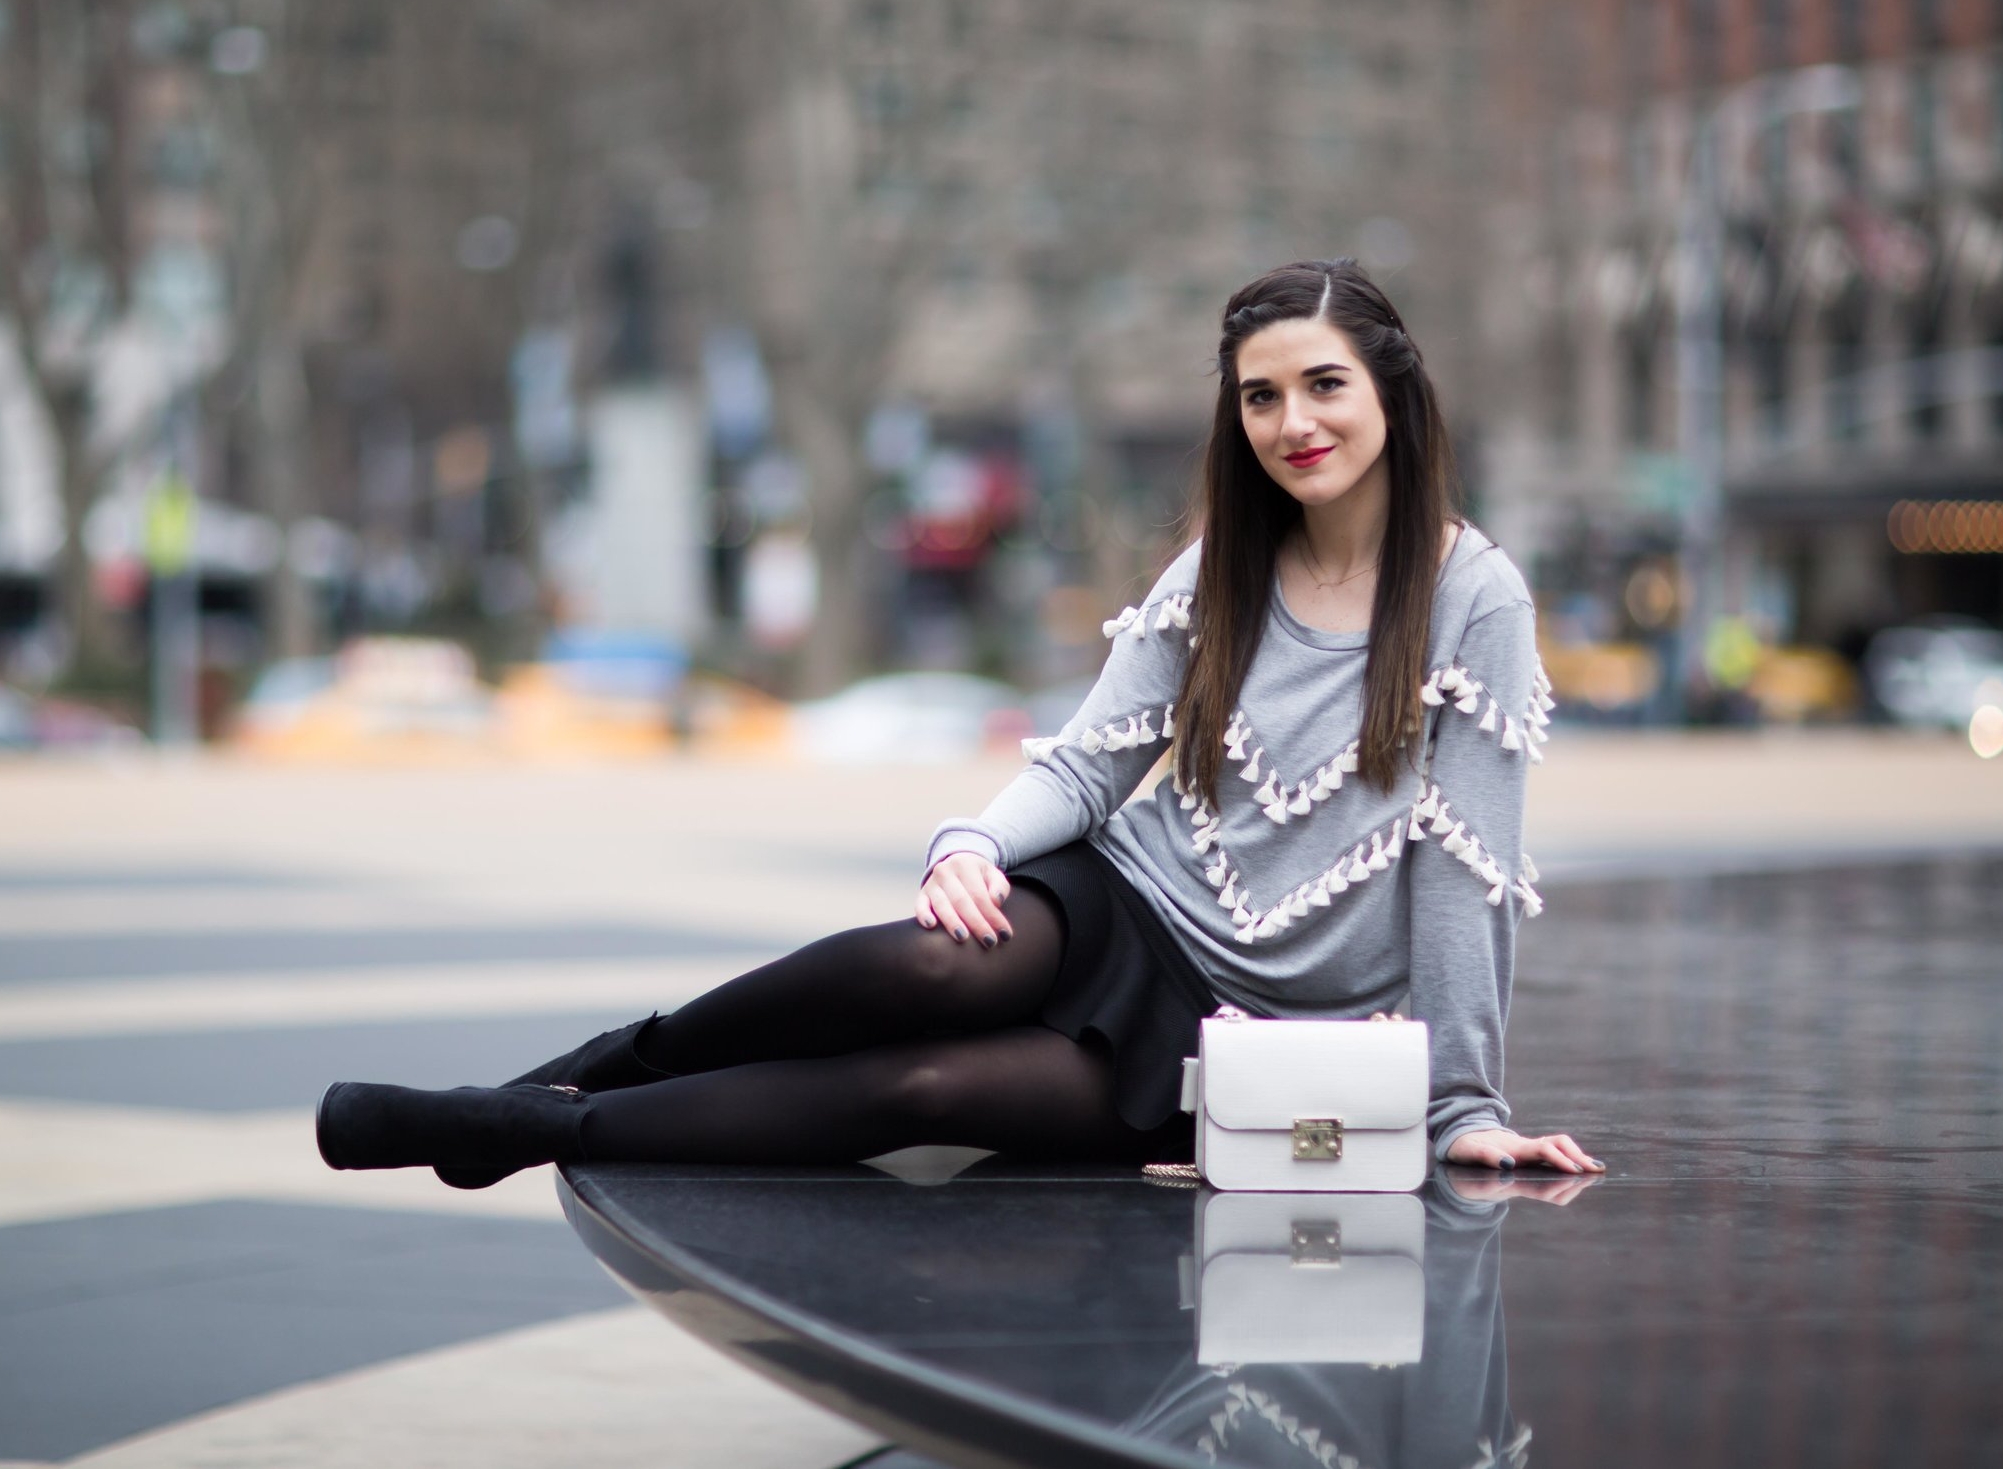 Grey Tassel Sweatshirt Everything You Wanted To Know About Blog Interns Esther Santer Fashion Blog NYC Street Style Blogger Outfit OOTD  Trendy Henri Bendel Waldorf Party Bag Black Mini Skirt Booties Shoes Cozy Tights Photoshoot Model Girl Women Hair.jpg